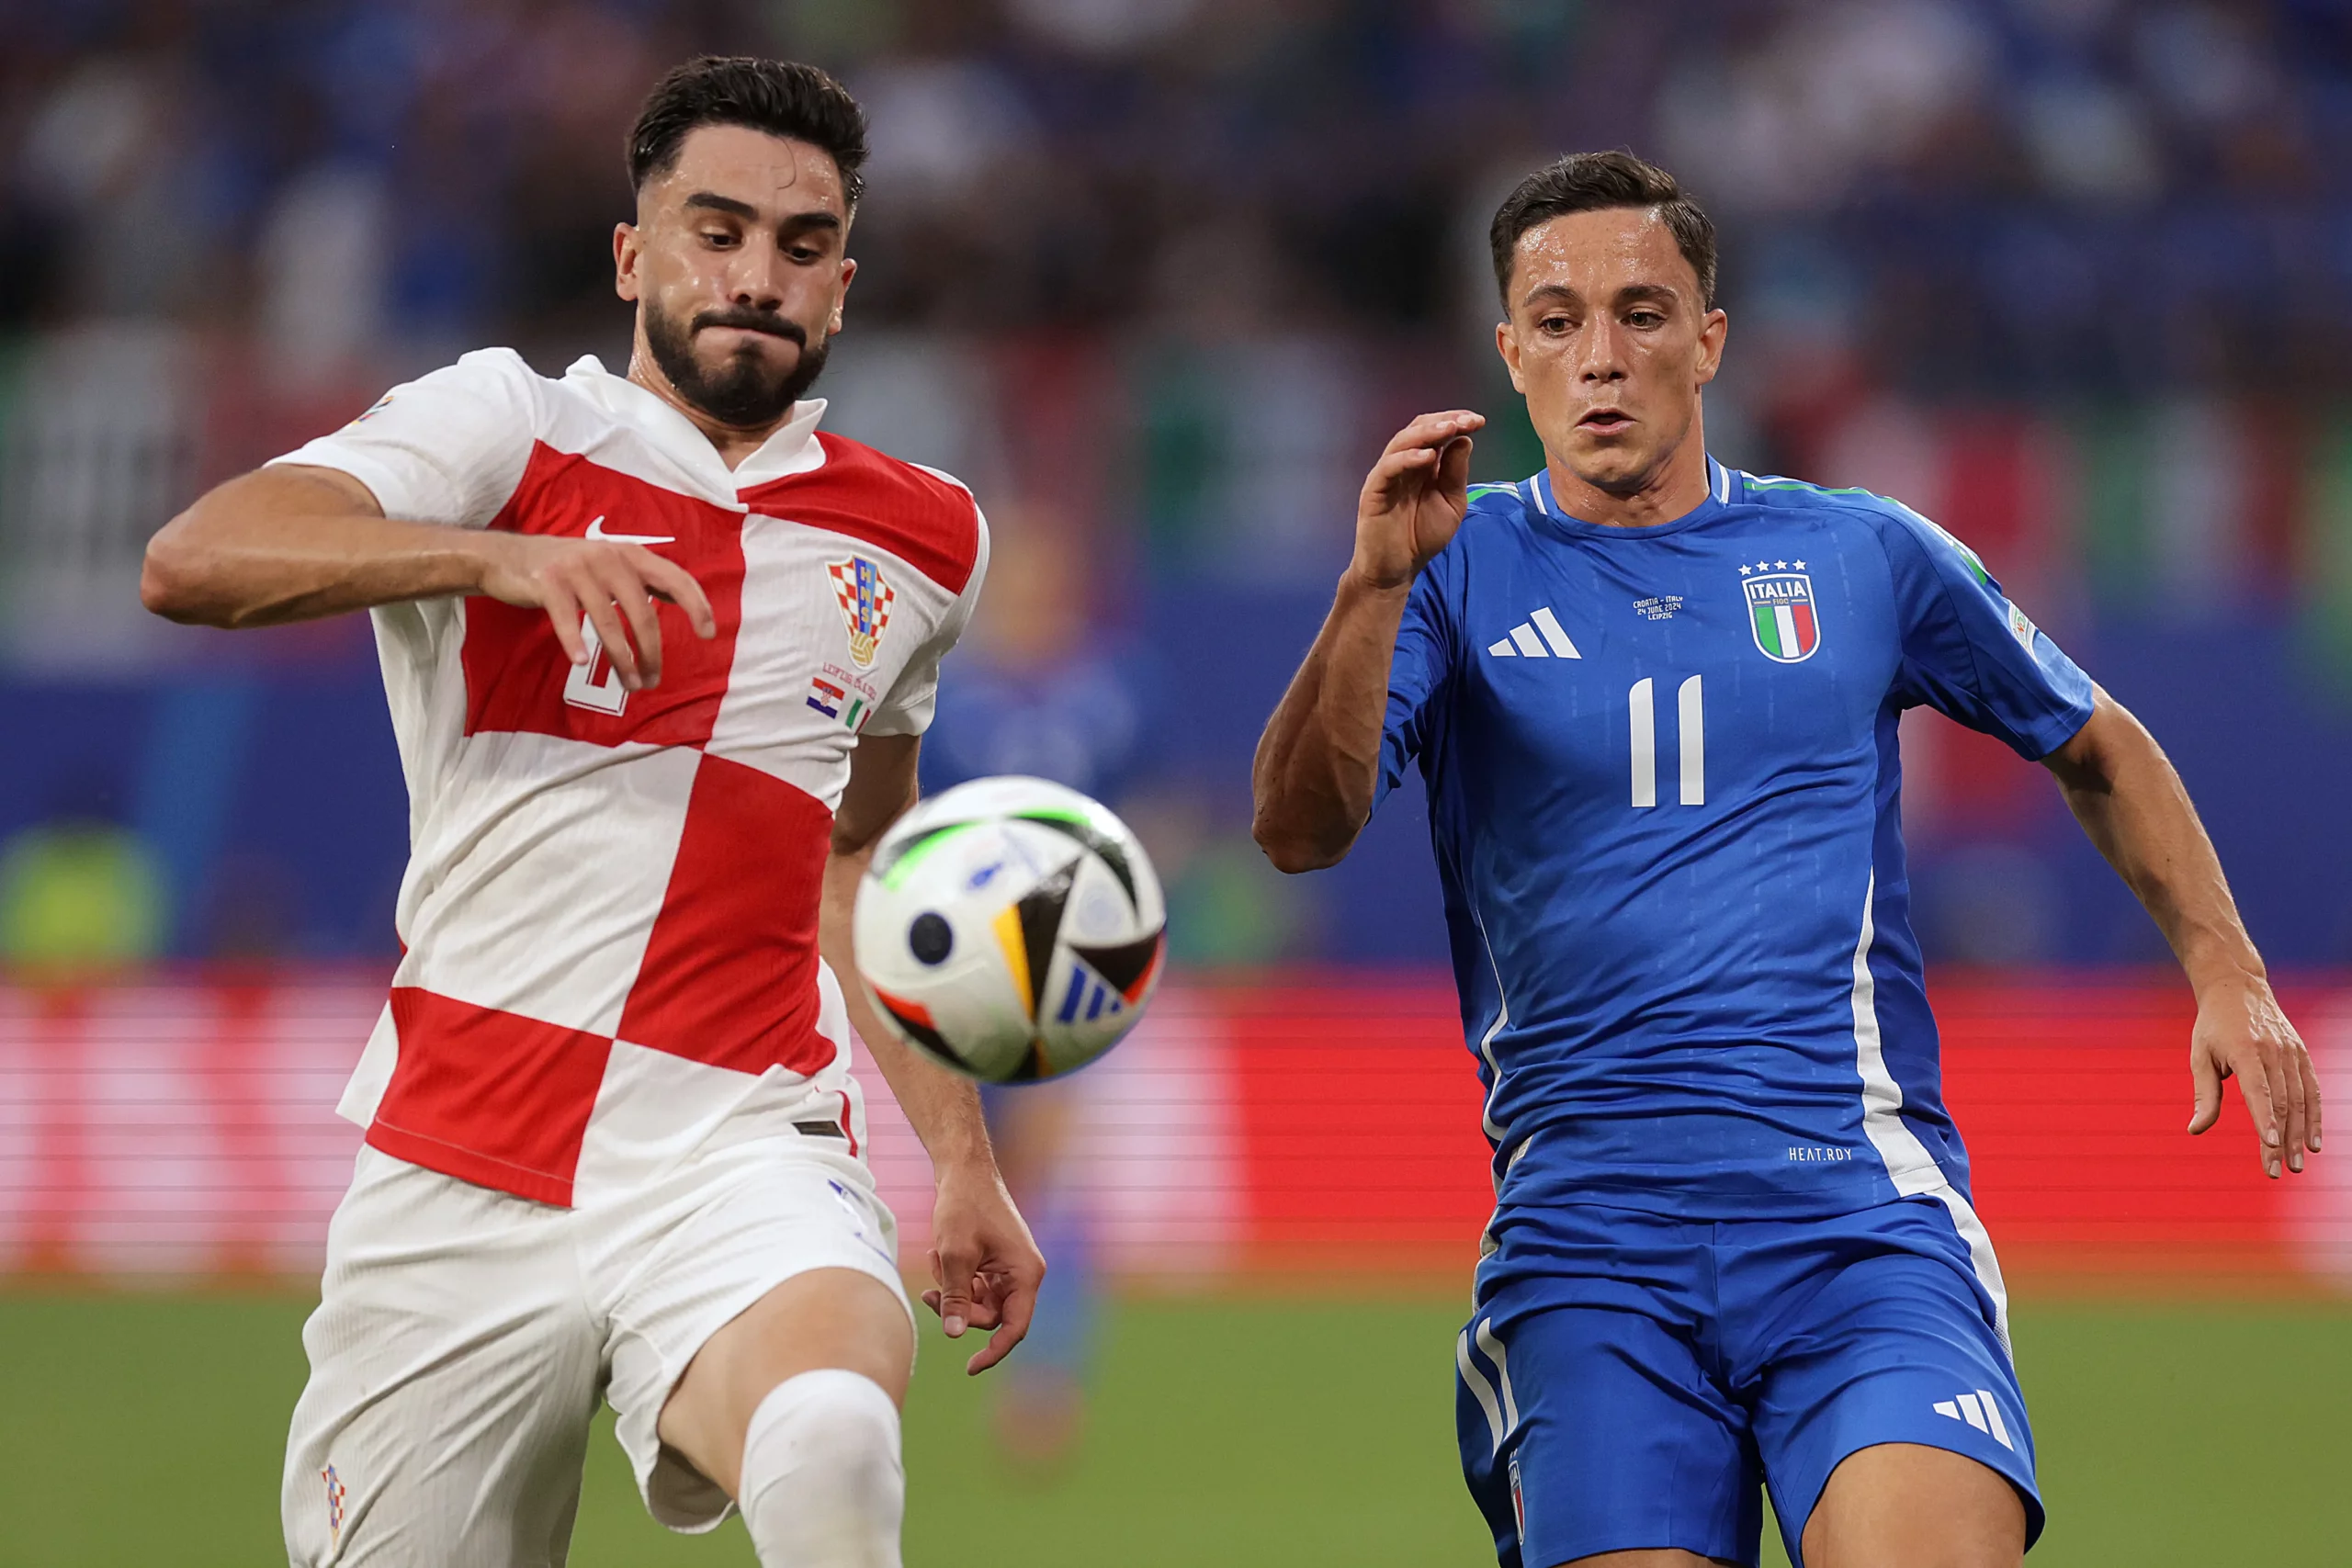 Croatia’s round of 16 dreams dashed by Italy’s comeback